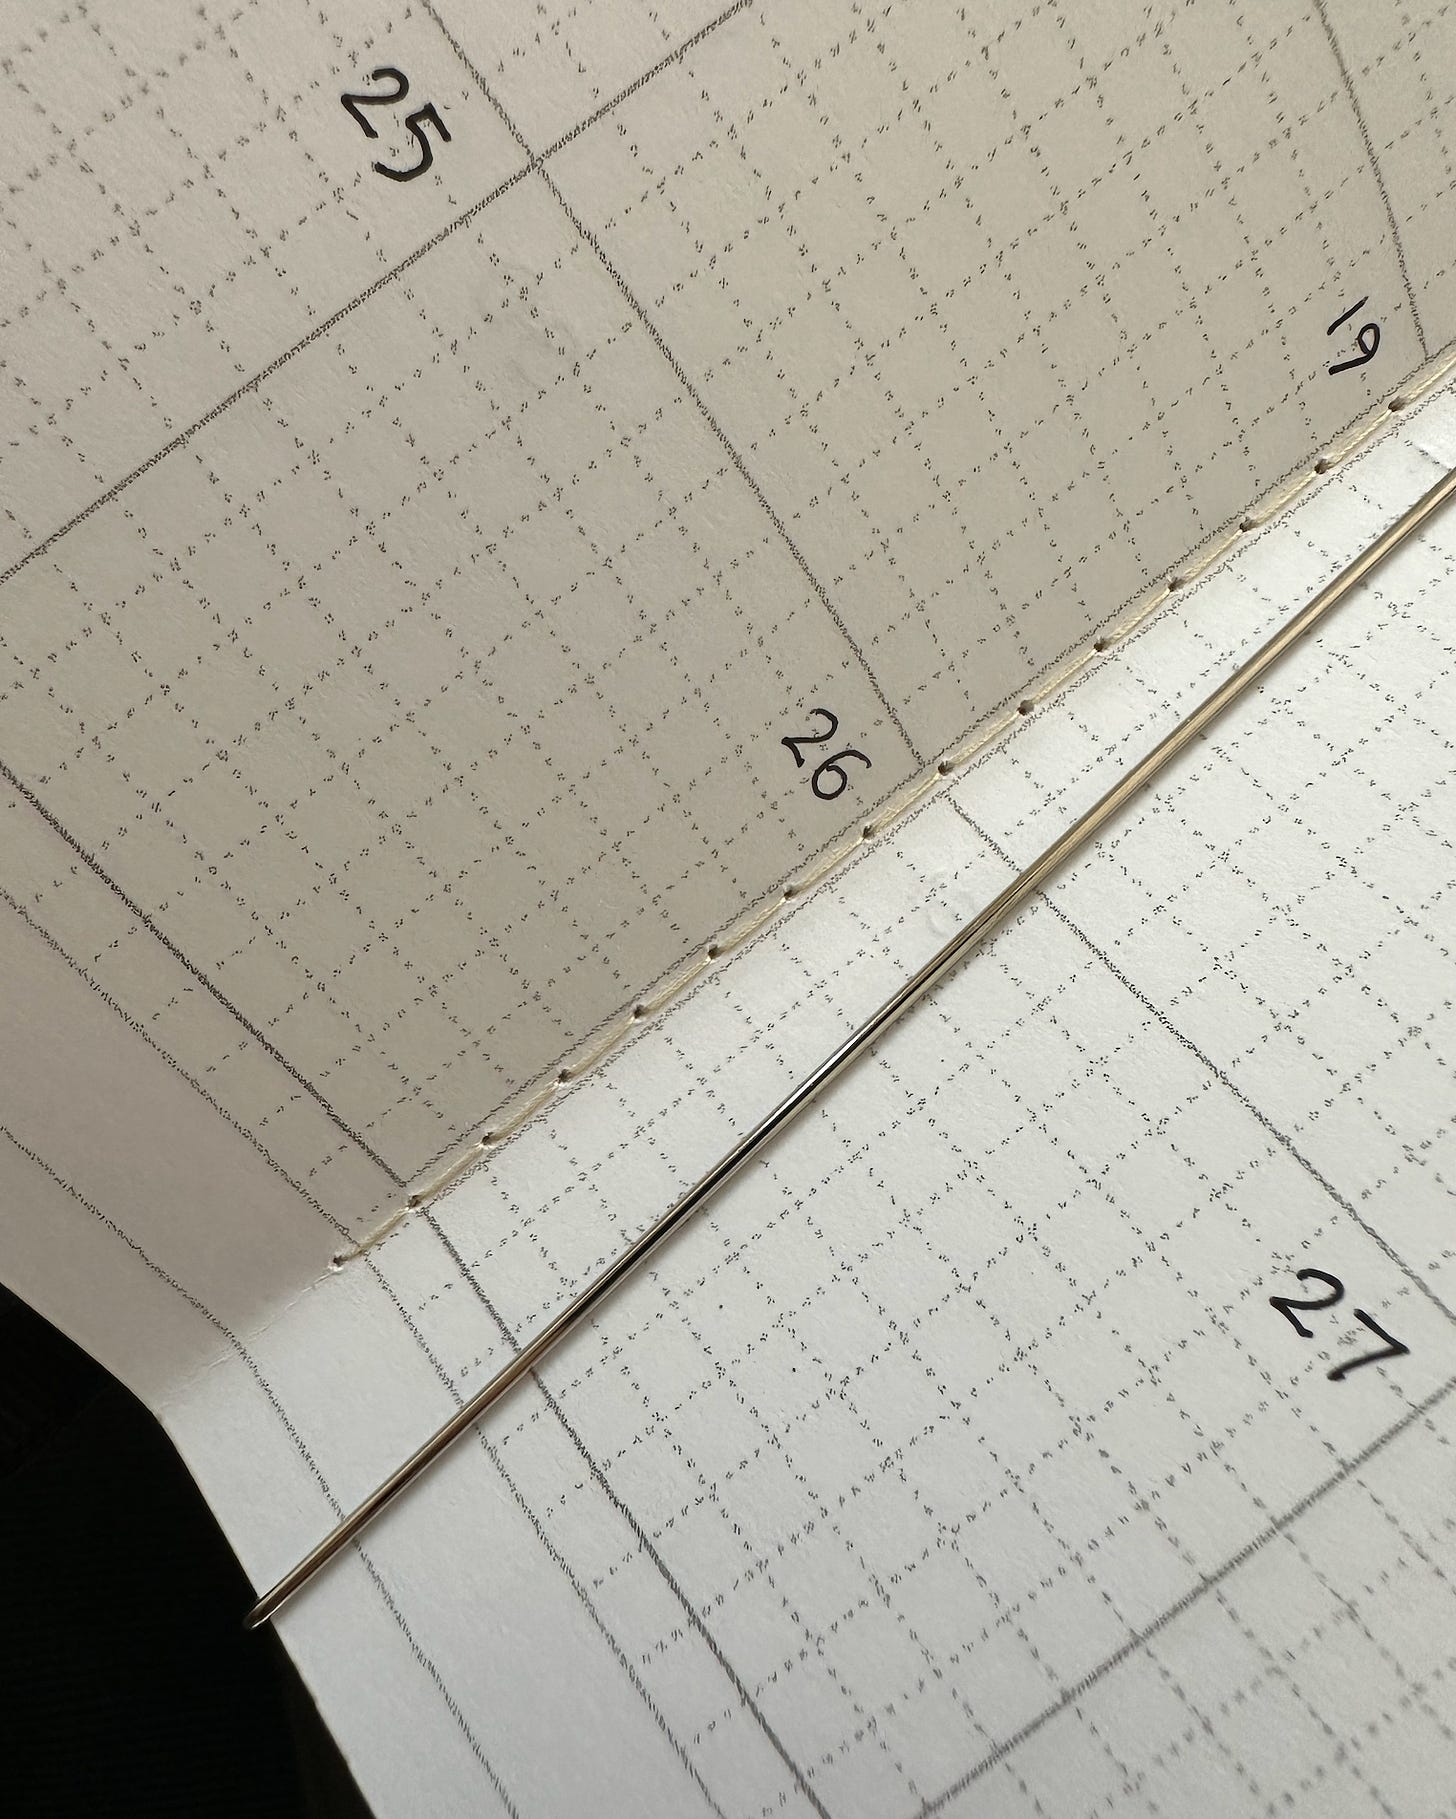 Closeup photo of some sheets of paper that have been sewn together by machine with a 5mm stitch length. There are numbered boxes on the part of the page that’s visible — it’s a monthly calendar with a dotted grid background. A thin metal bar lies across the page; this is what keeps folded paper in place in the Paper Saver notebook. The sewn calendar pages have been pulled out from the bar at an angle to reveal the stitching.